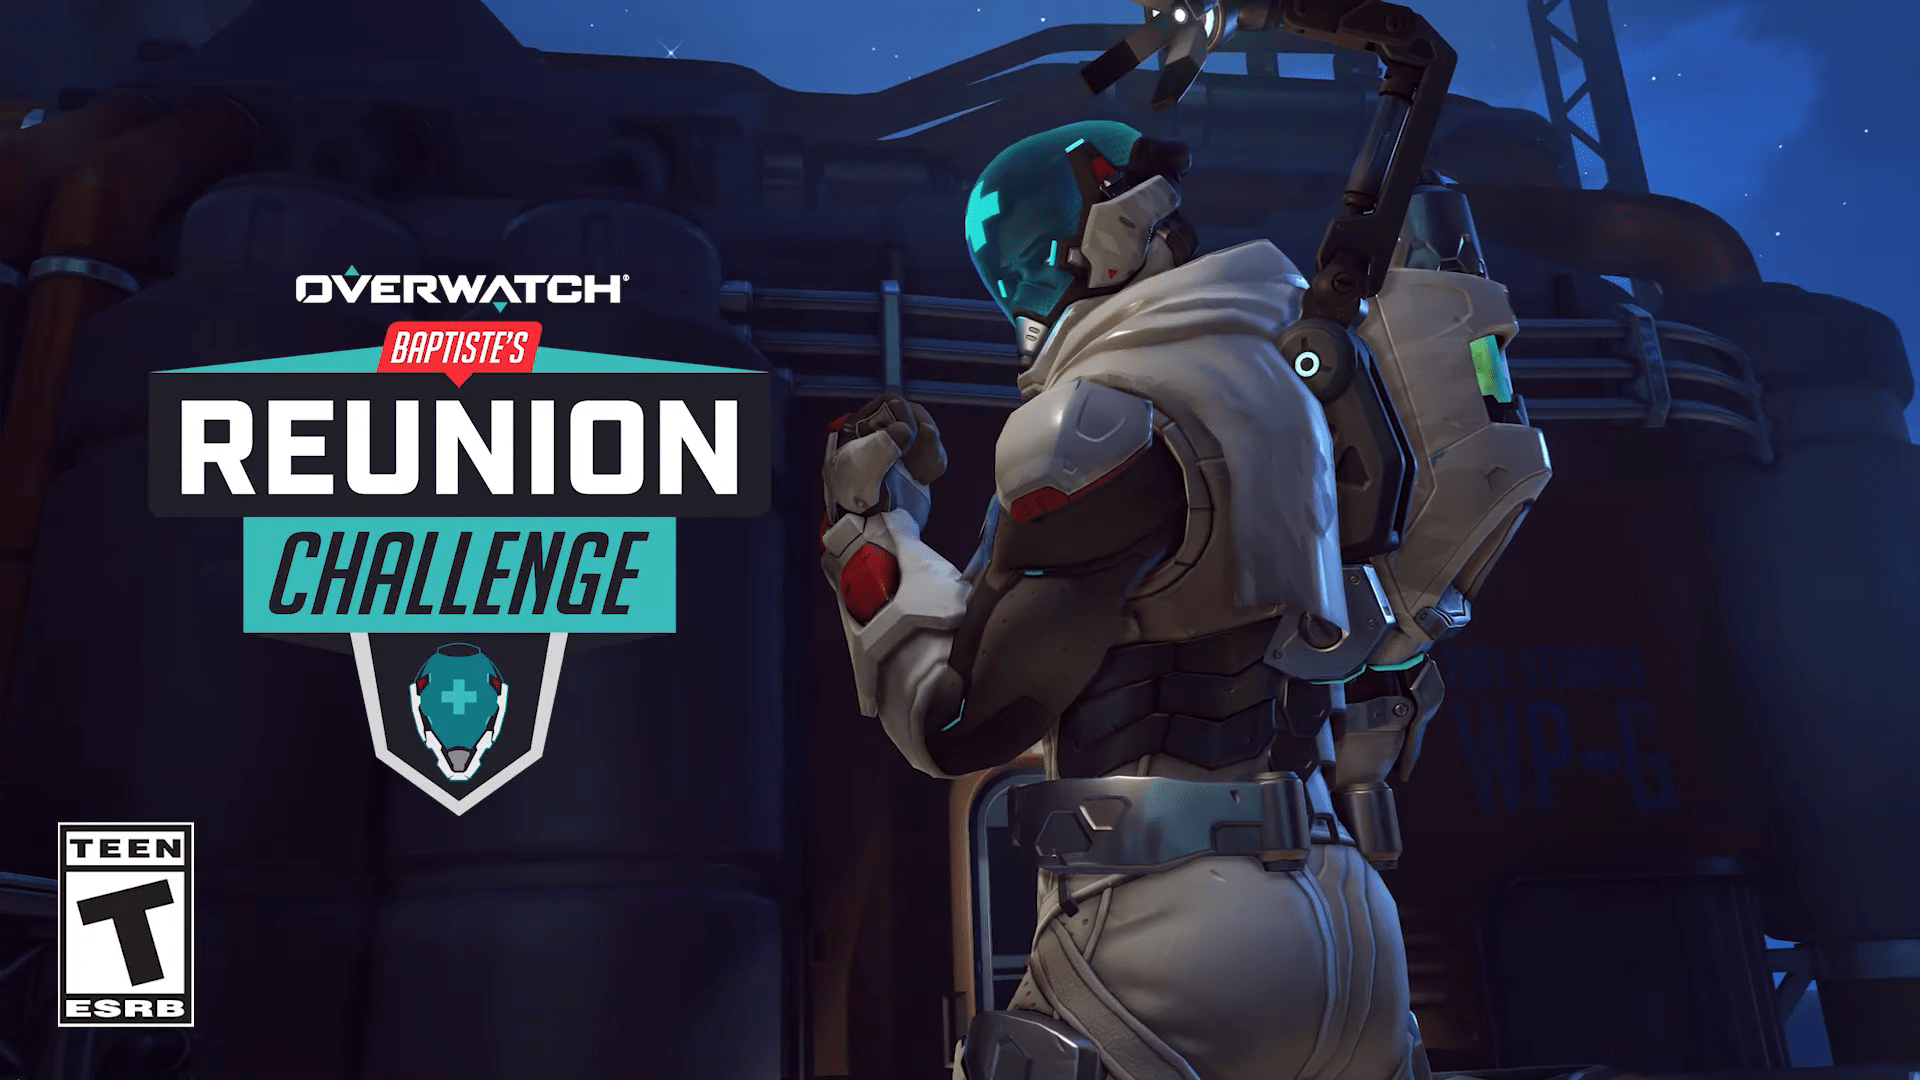 Overwatch Baptiste Reunion Challenge Only Has A Few Days Left